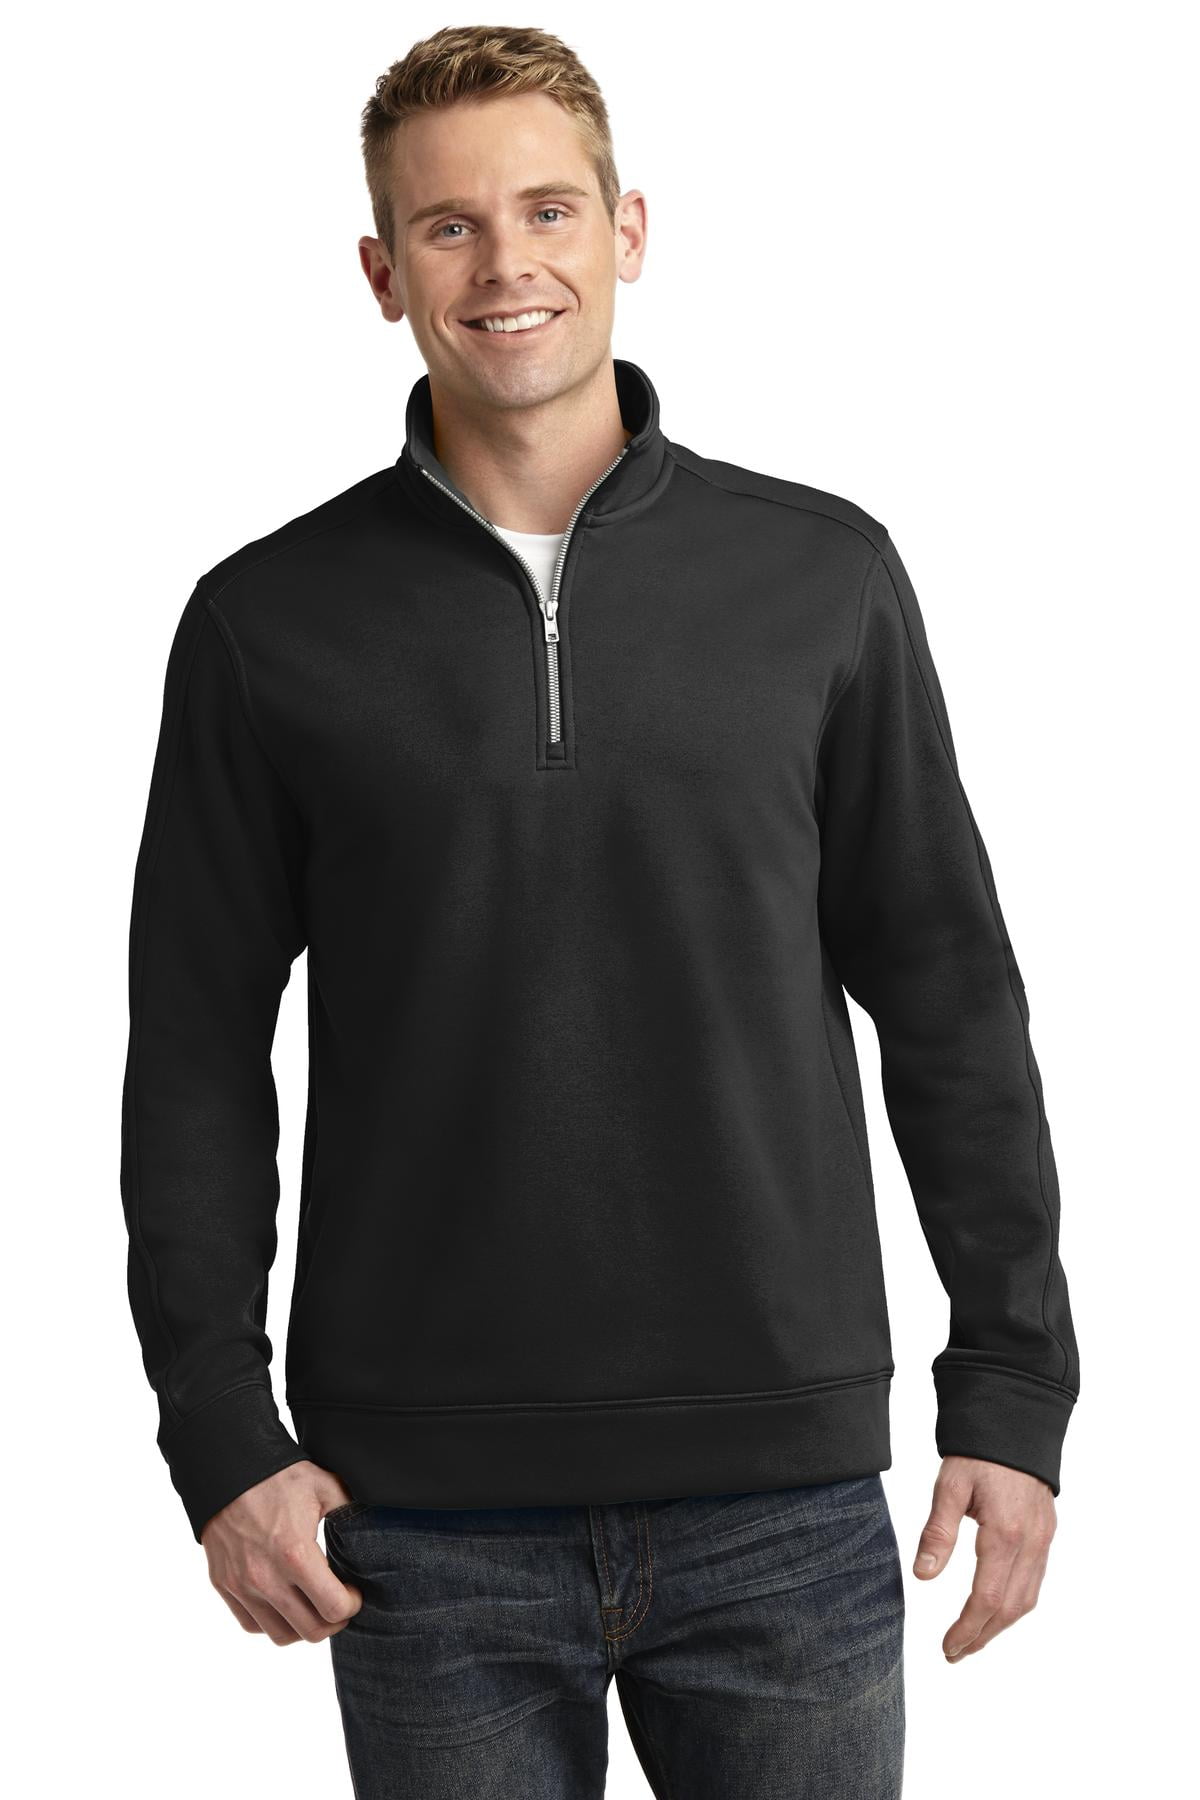 MEN'S CLASSIC 1/4 ZIP XS-3XL SOLID LONG SLEEVE PULLOVER MOISTURE WICKING